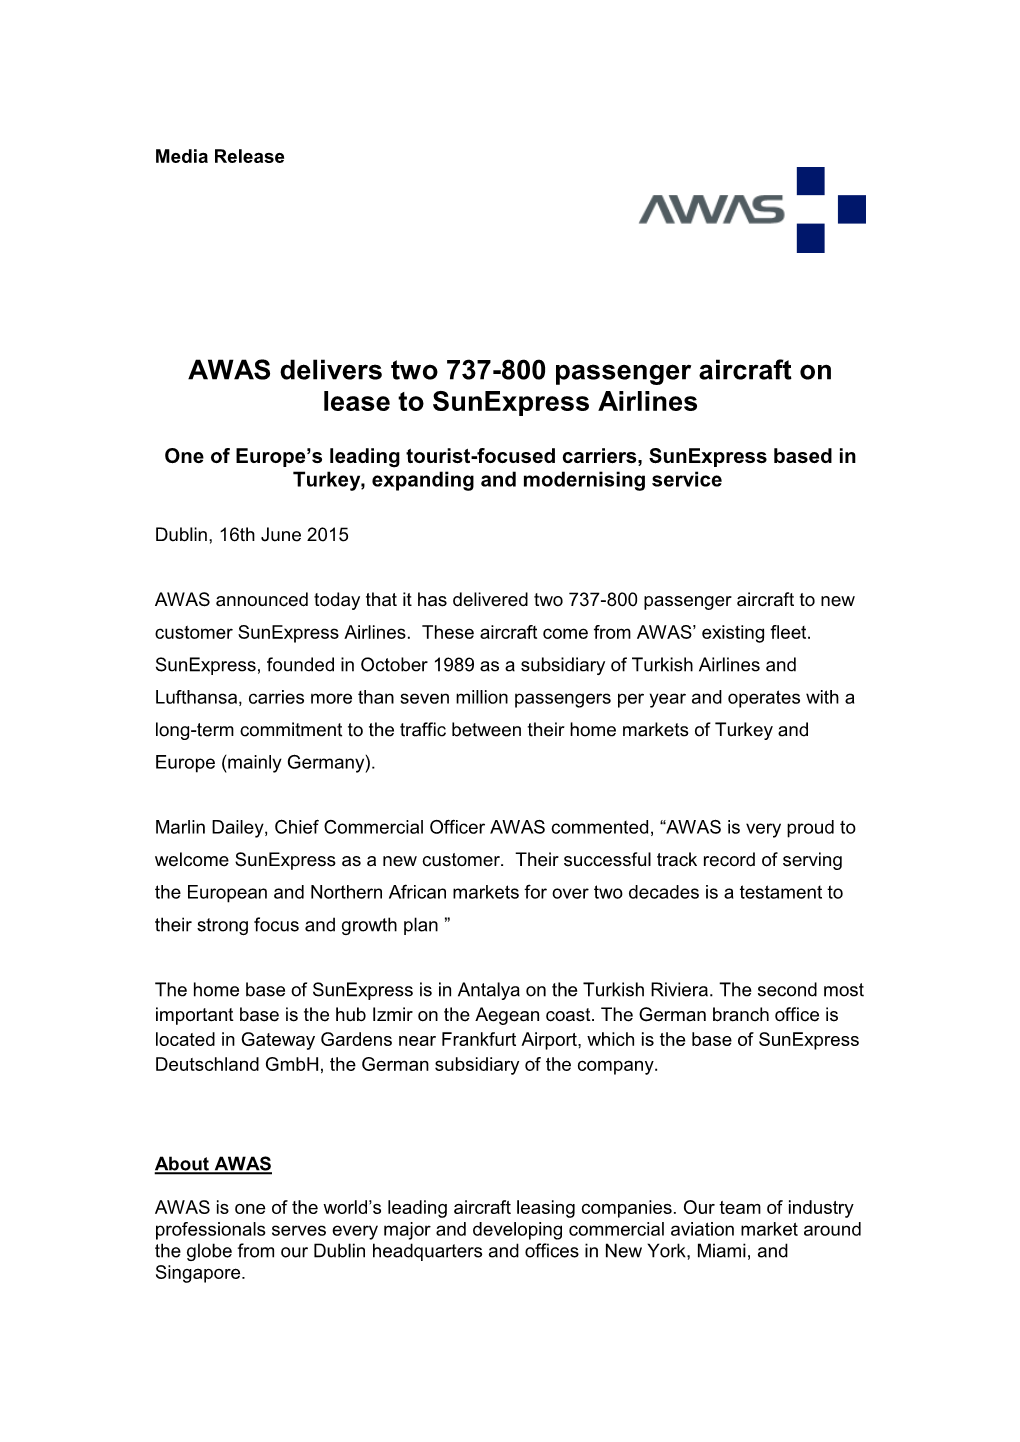 AWAS Delivers Two 737-800 Passenger Aircraft on Lease to Sunexpress Airlines